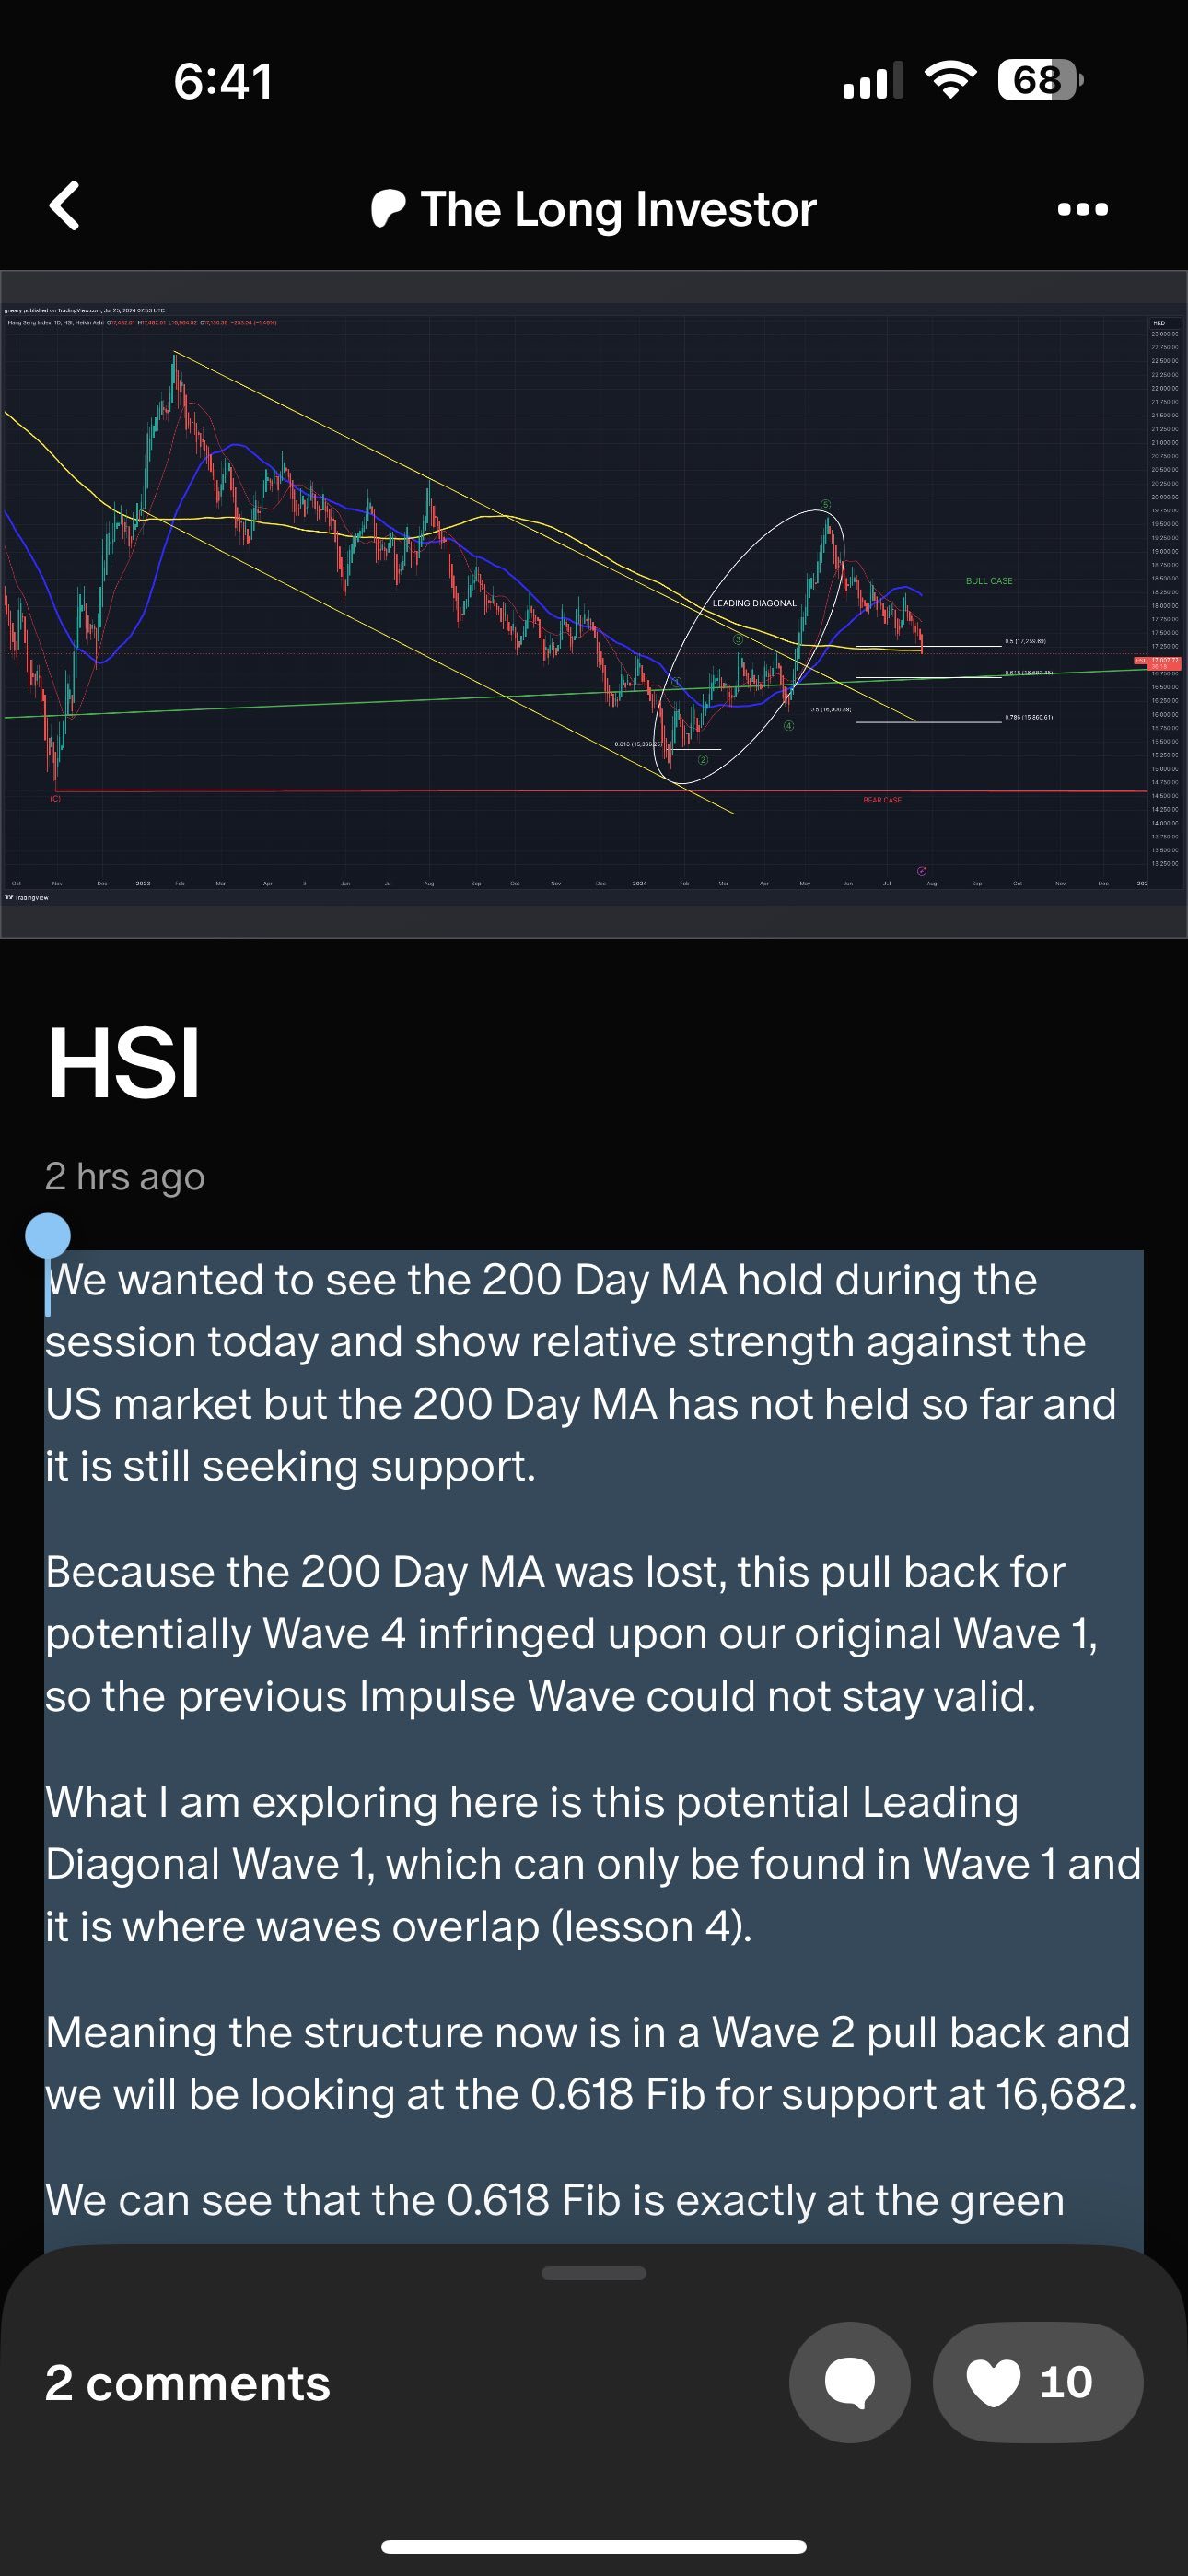 $HSI Futures(JUL4) (HSImain.HK)$ We wanted to see the 200 Day MA hold during the session today and show relative strength against the US market but the 200 Day ...